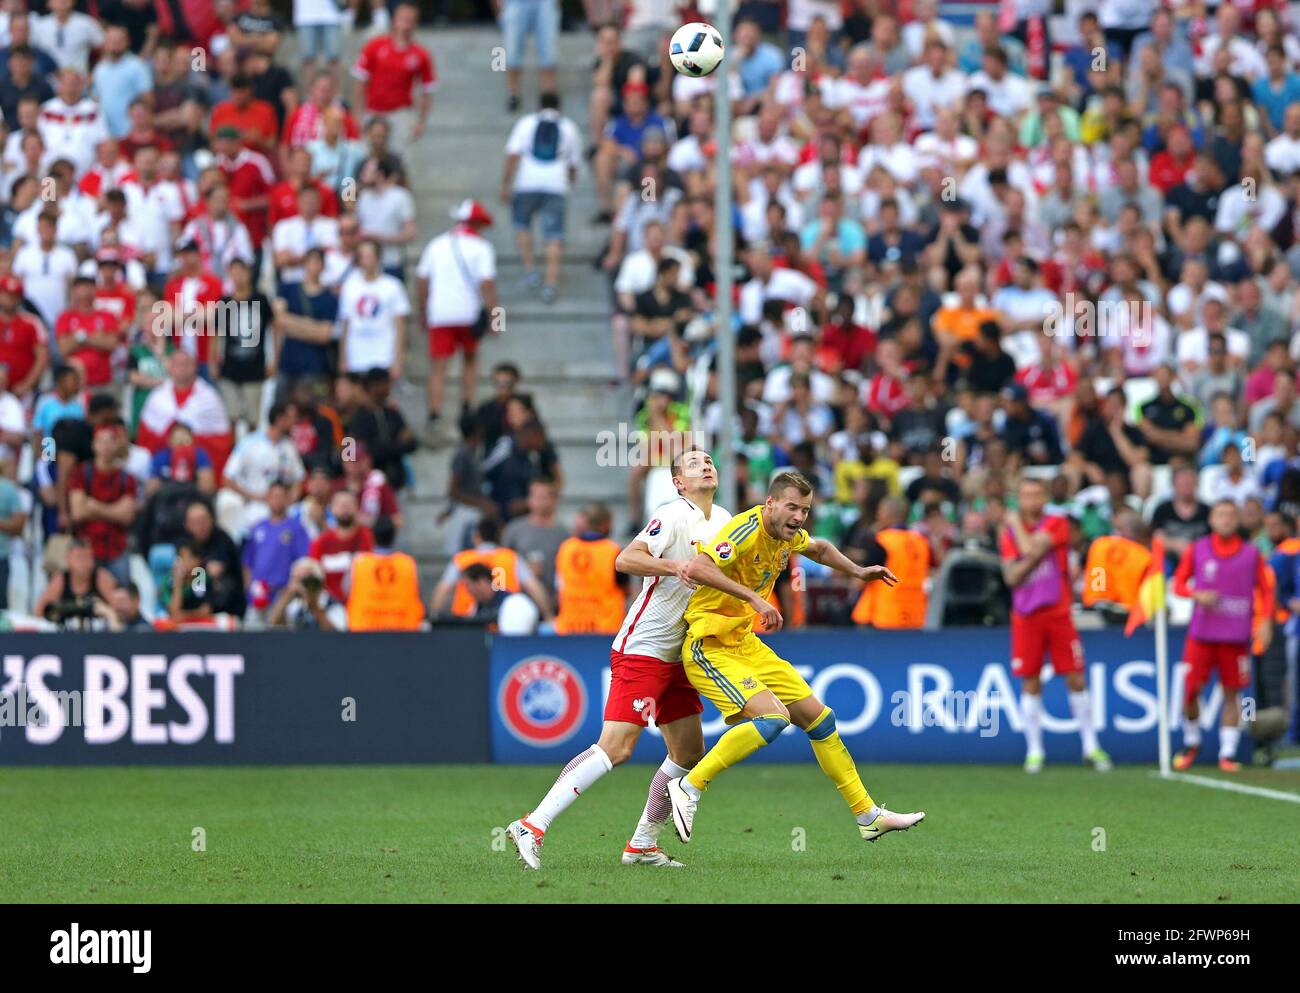 MARSEILLE, FRANCE - JUNE 21, 2016: Andriy Yarmolenko of Ukraine (in Yellow) fights for a ball with Artur Jedrzejczyk of Poland during their UEFA EURO 2016 game at Stade Velodrome in Marseille Stock Photo